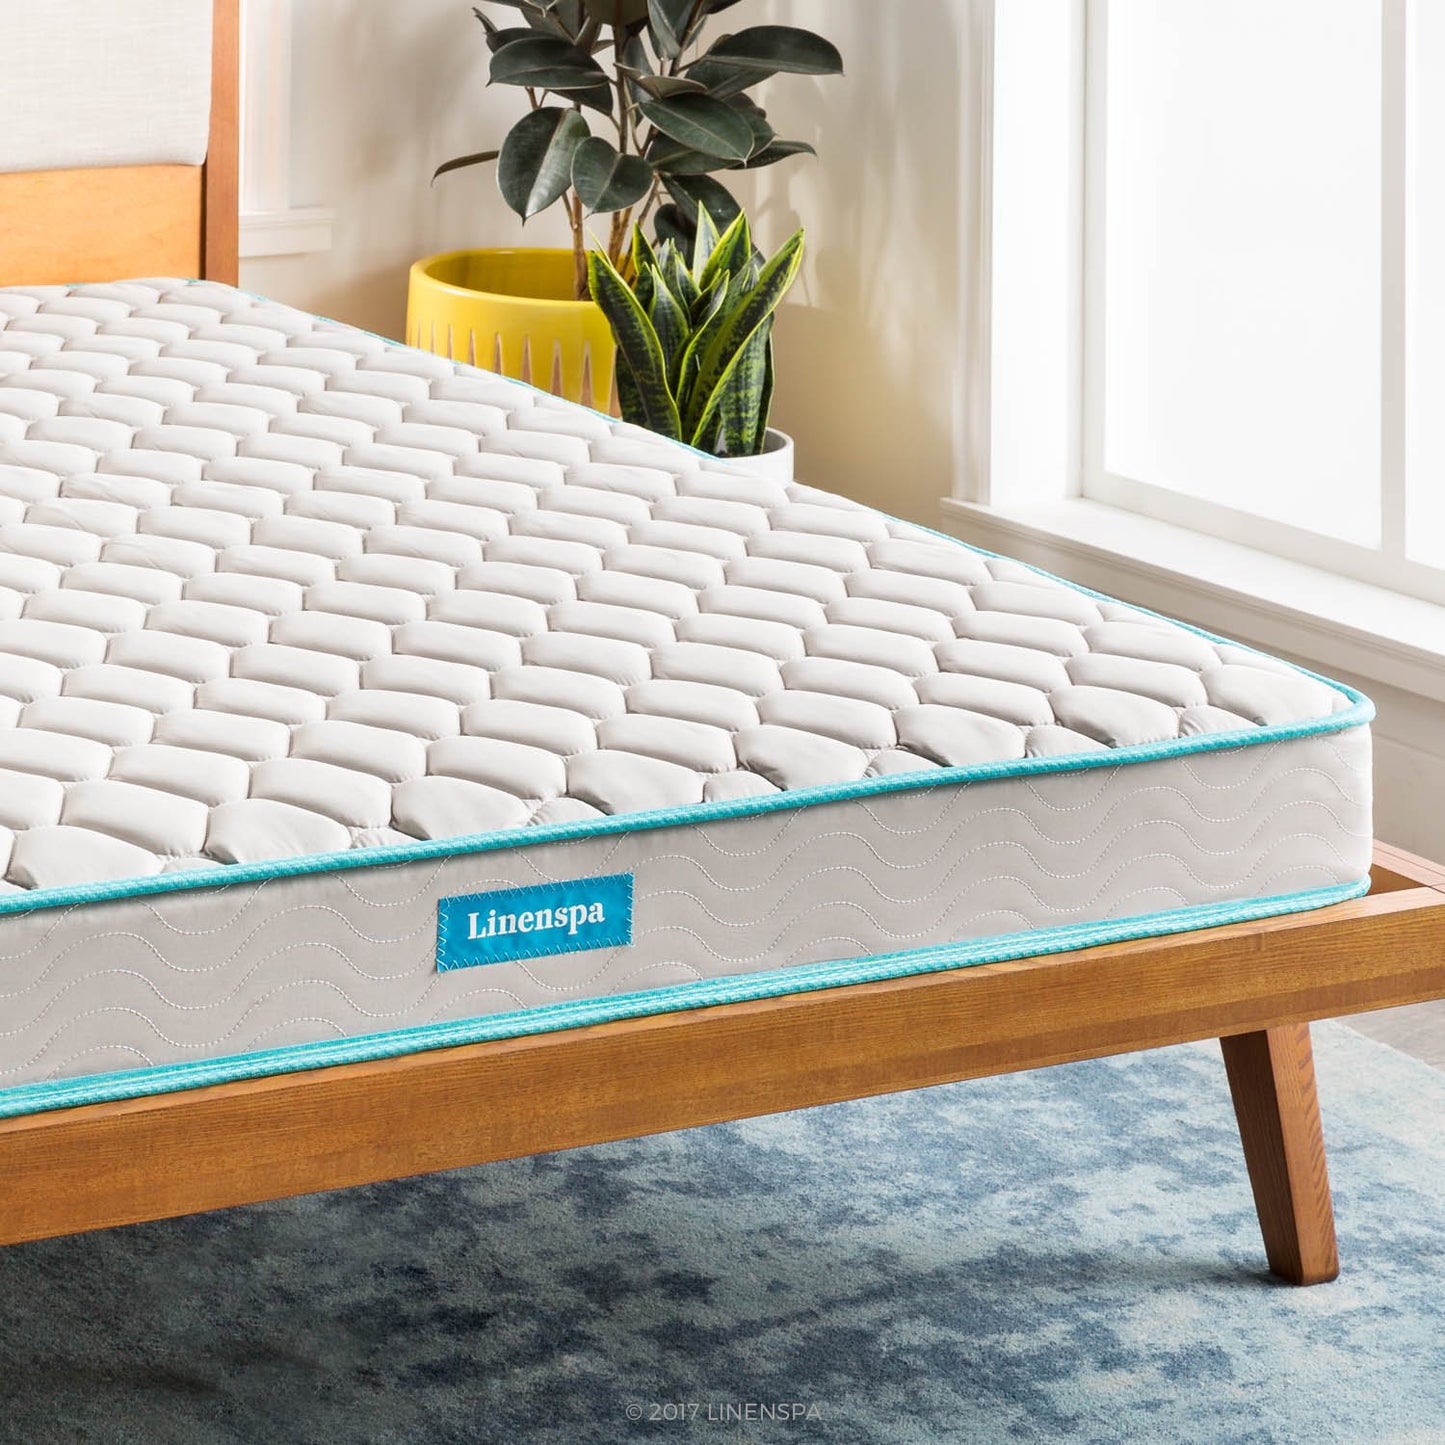 Linenspa 6 Inch Mattress - Firm Feel - Bonnell Spring with Foam Layer - Mattress in a Box - Youth or Kids Bed - Guest Bedroom - Durable and Breathable Support - Affordable - Full XL Size- White